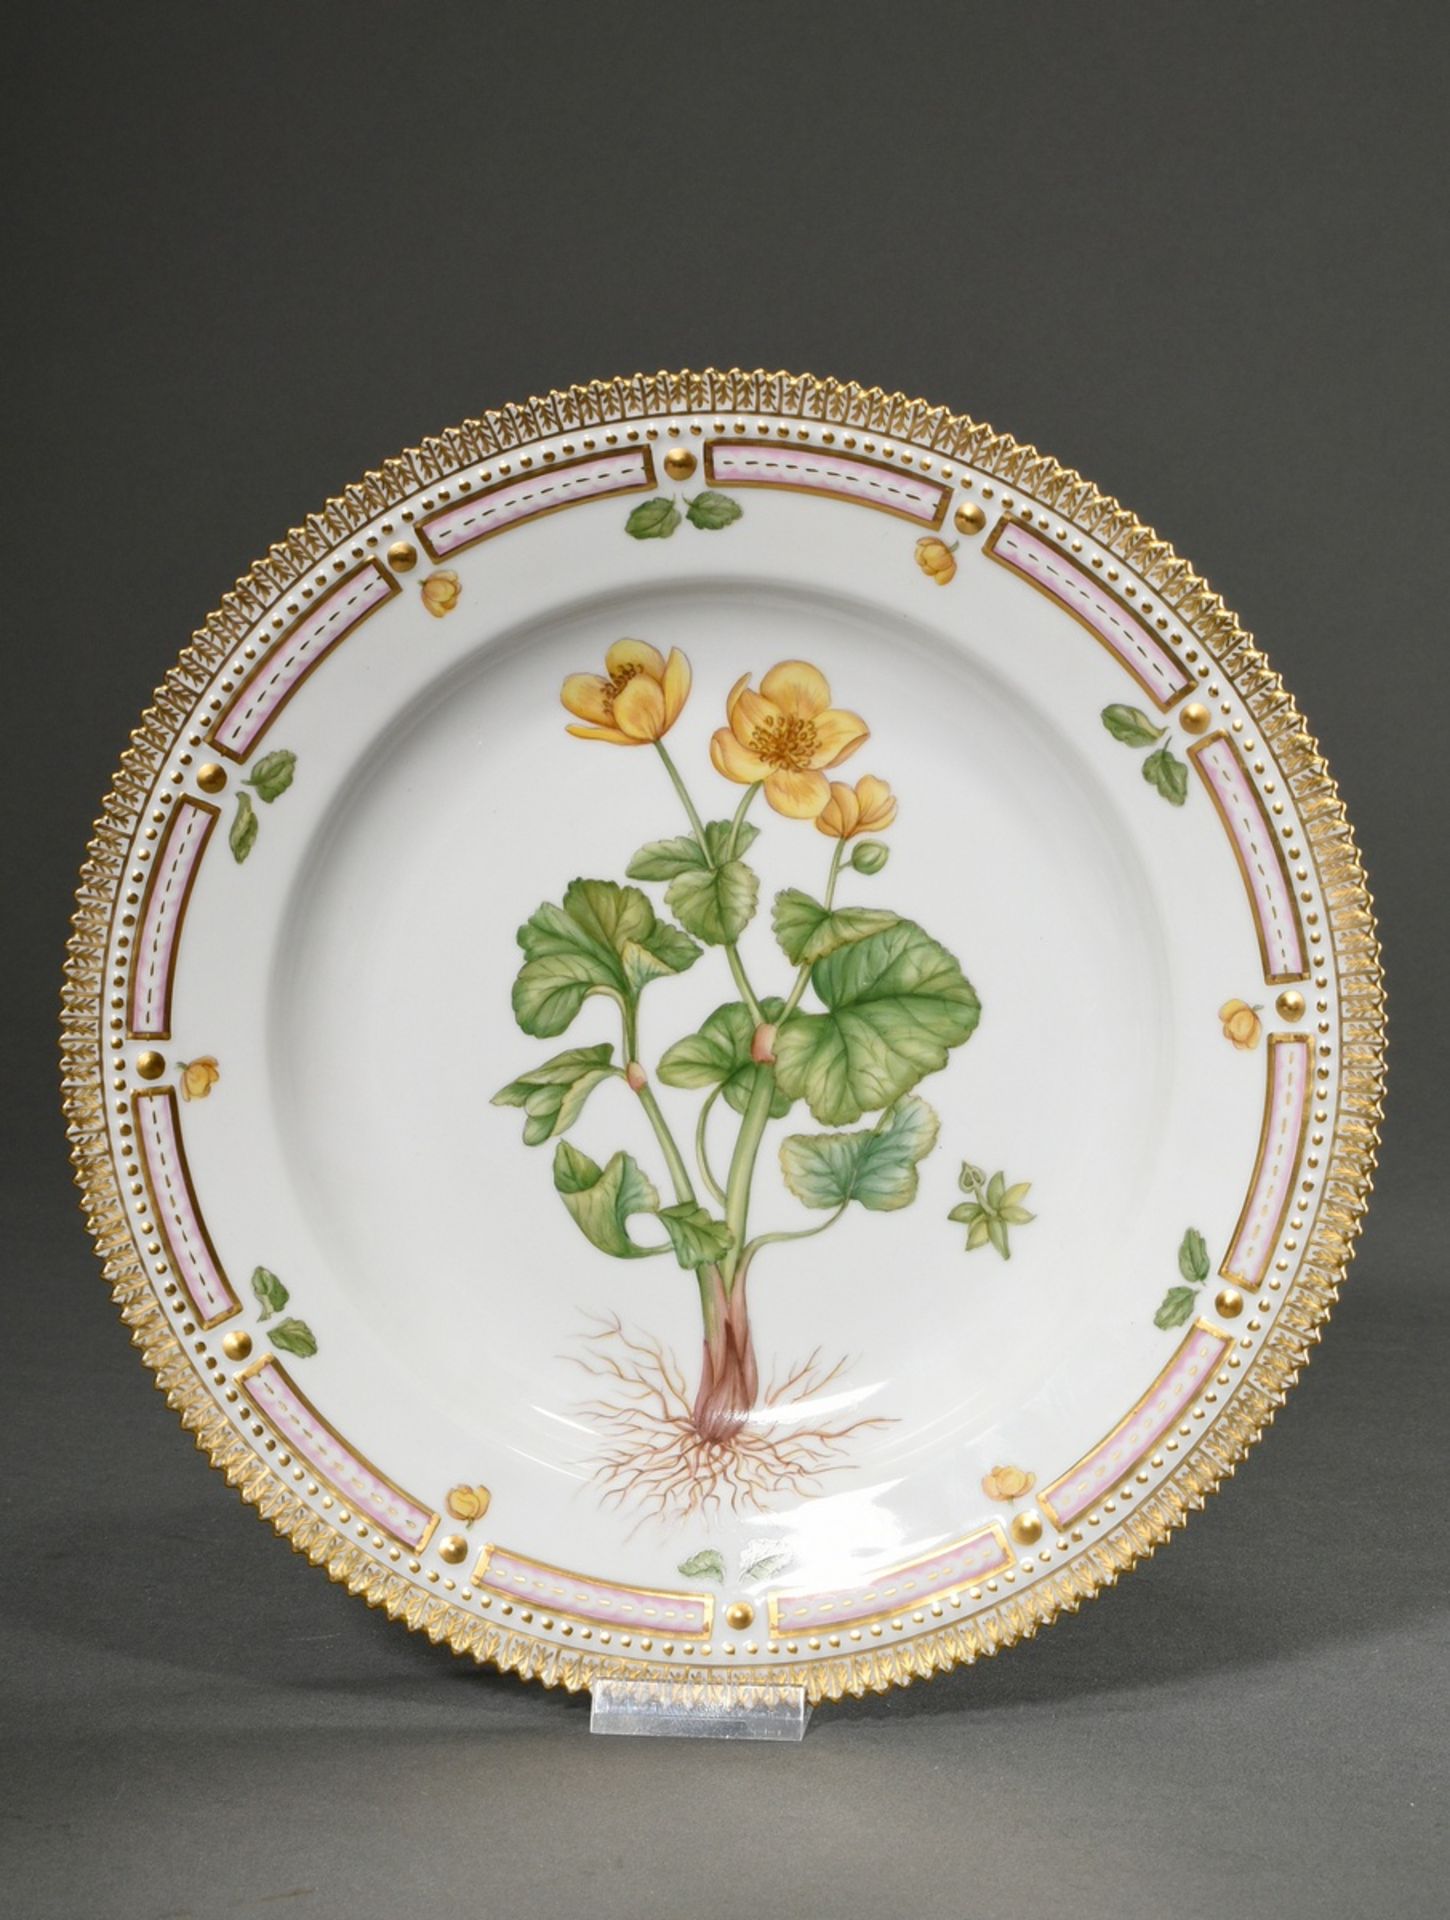 Royal Copenhagen "Flora Danica" dinner plate with polychrome painting in the mirror, gold staffage  - Image 5 of 6